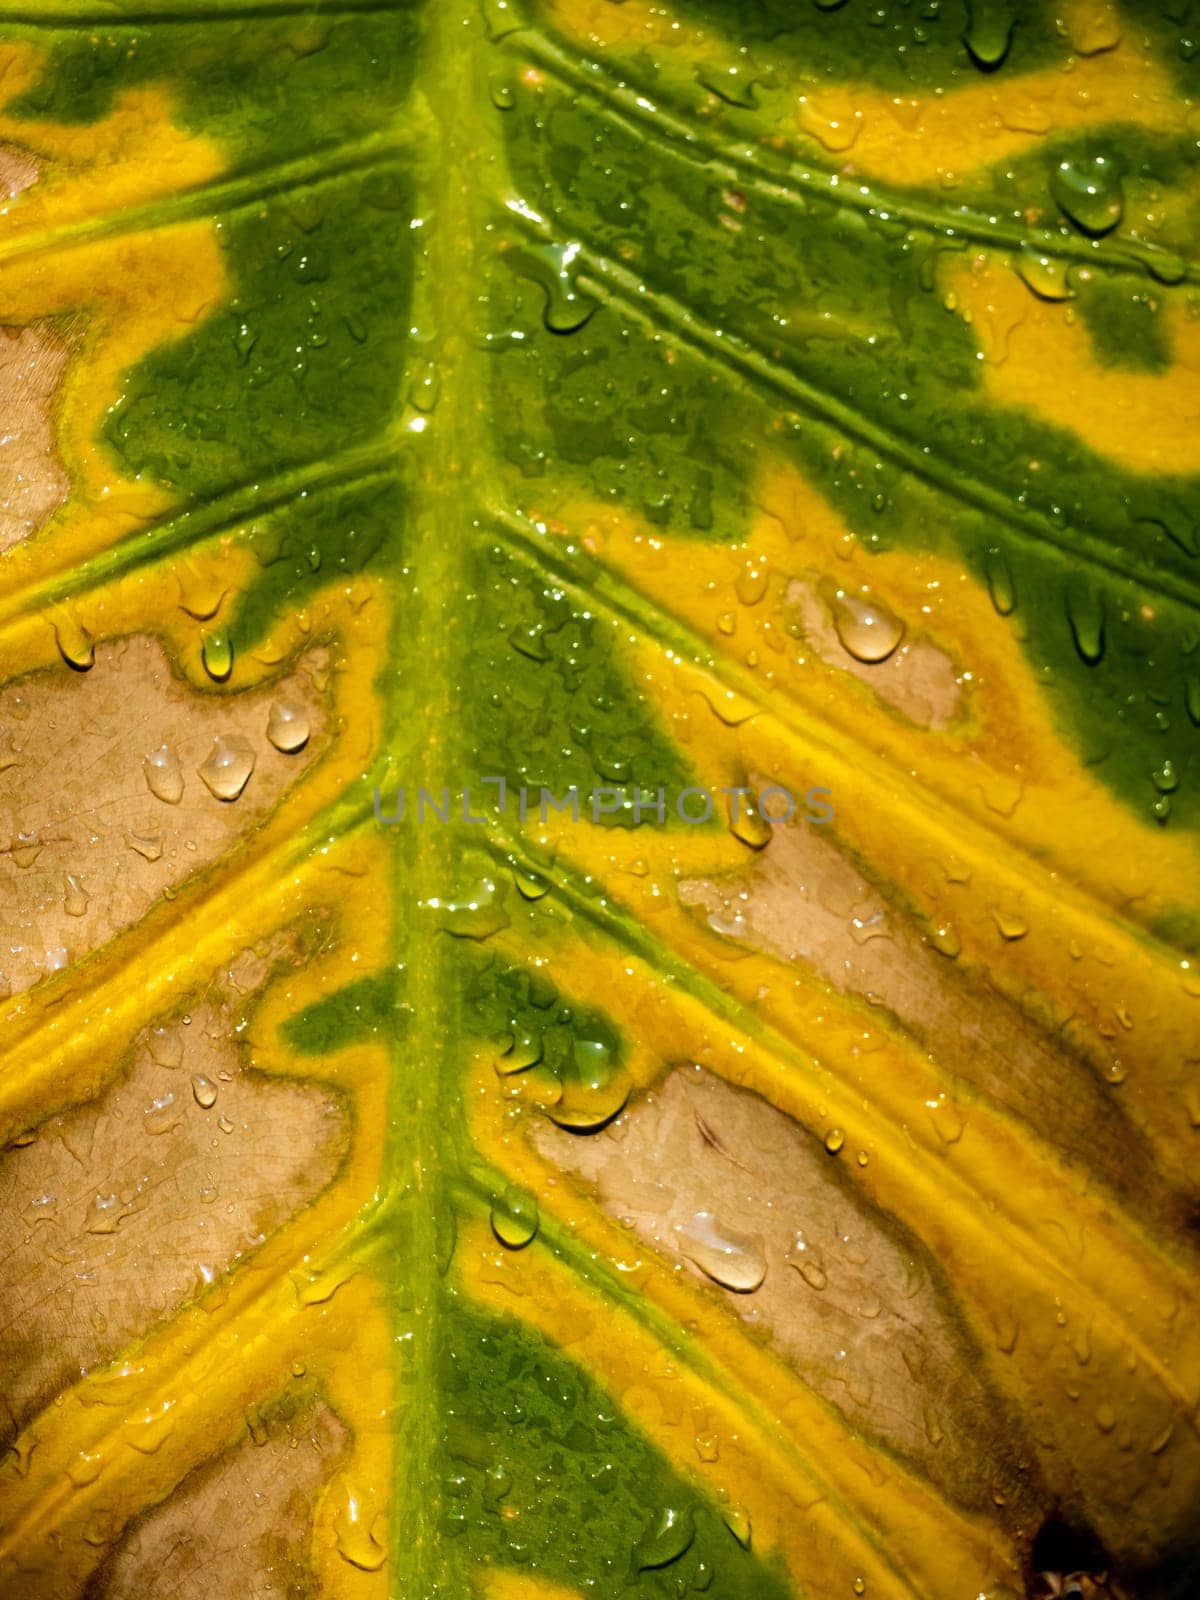 The wounded surface of a withering Alocasia leaf by Satakorn